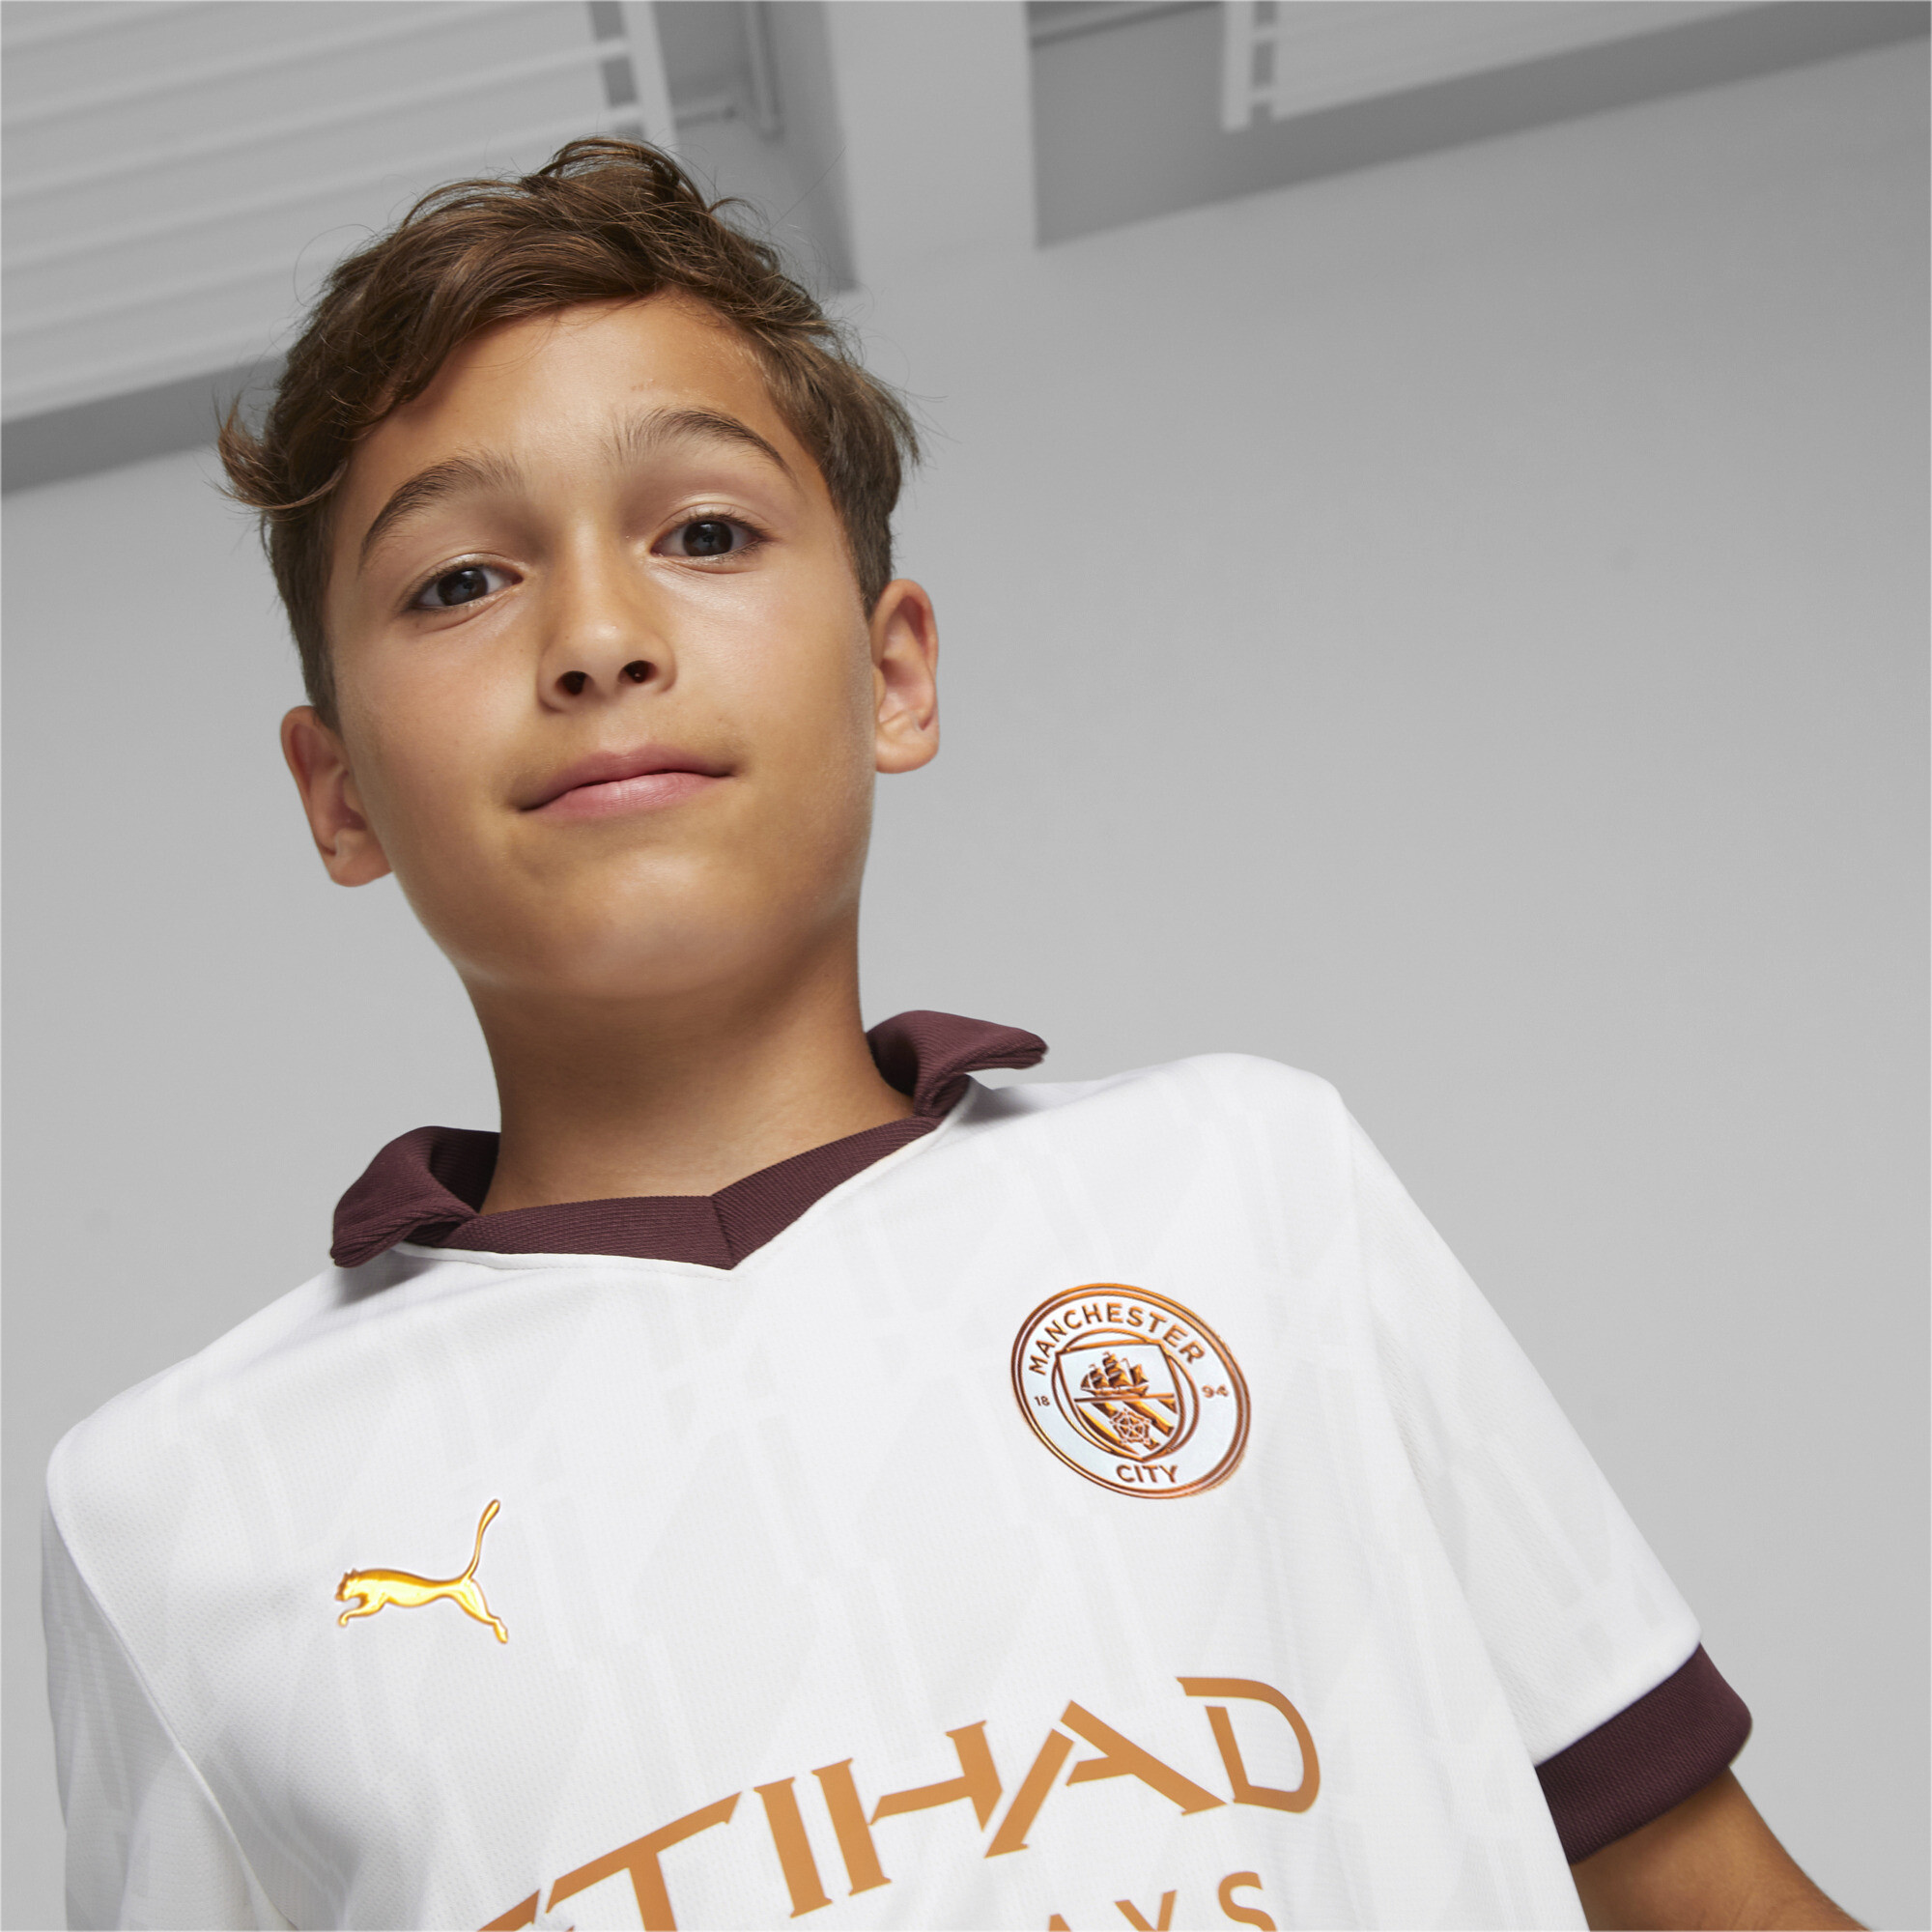 PUMA Manchester City 23/24 Away Jersey In White, Size 5-6 Youth